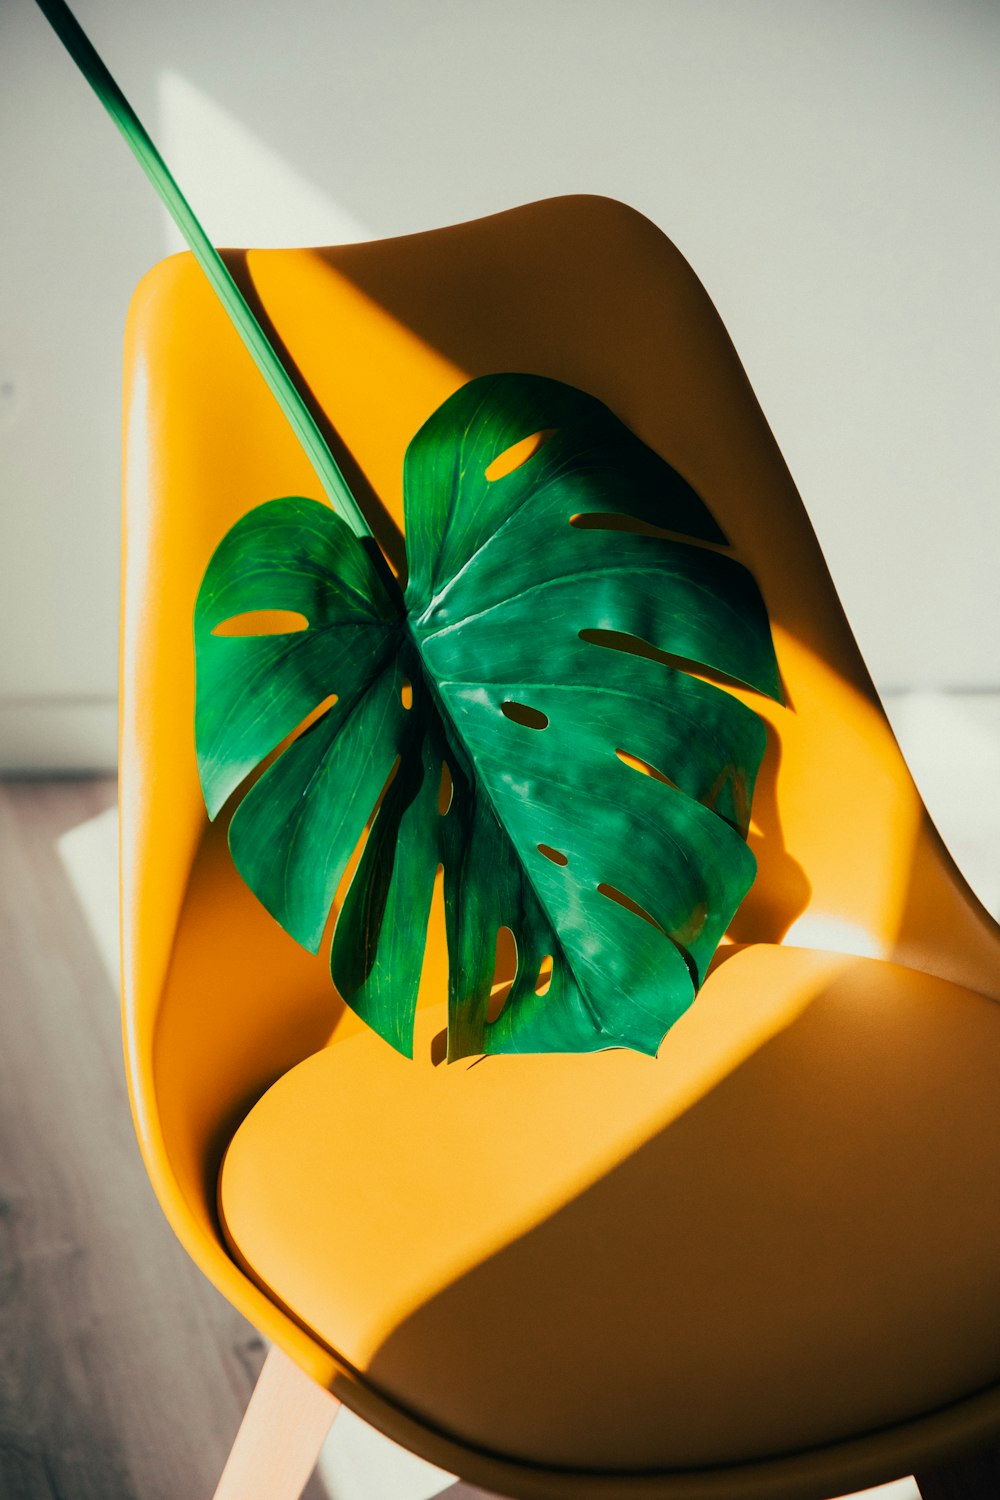 green leaf on yellow plastic chair